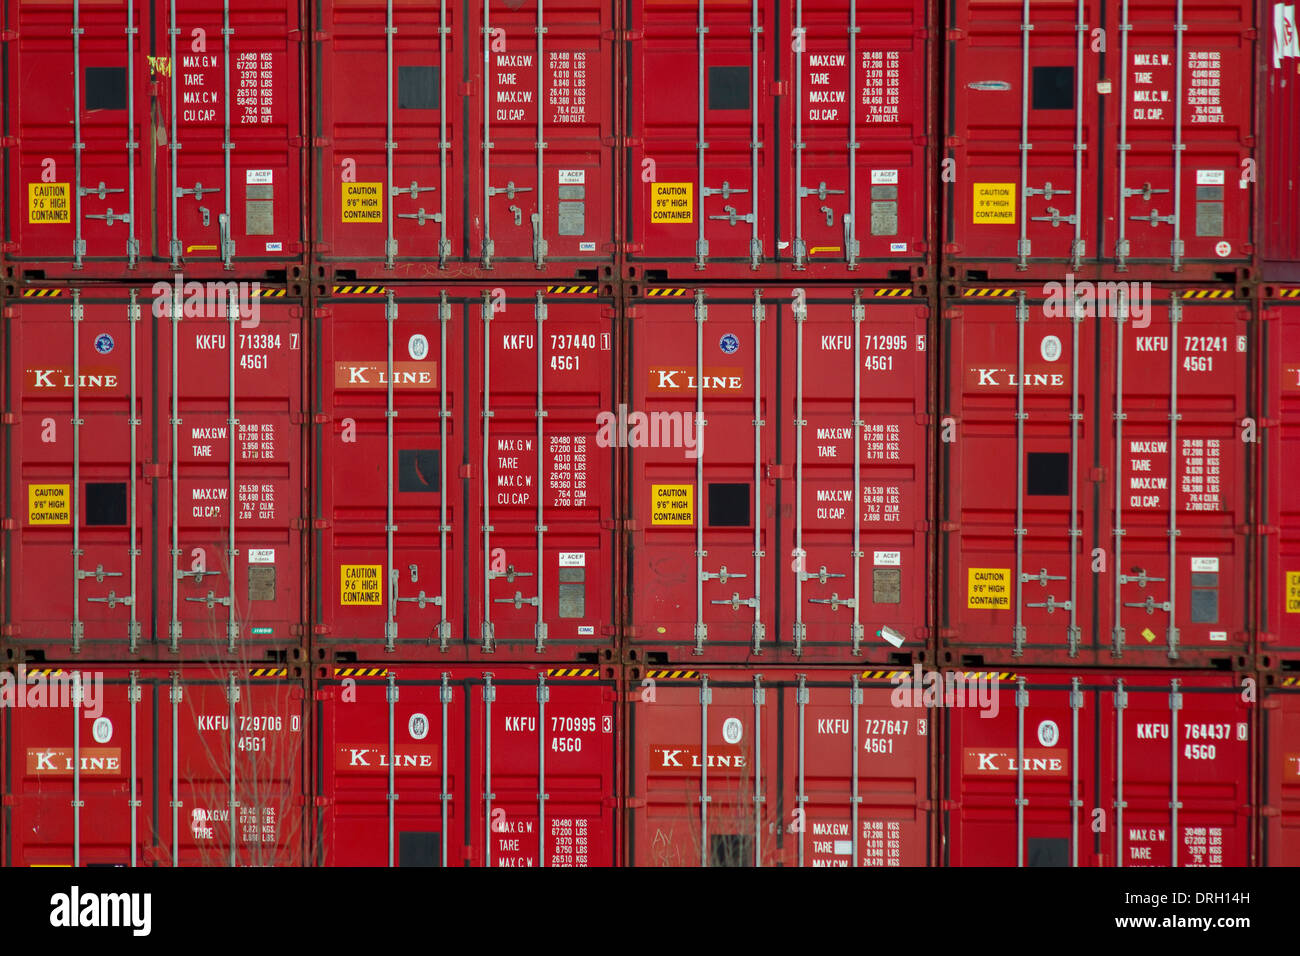 Shipping (cargo) containers at the Port of Oakland. Stock Photo